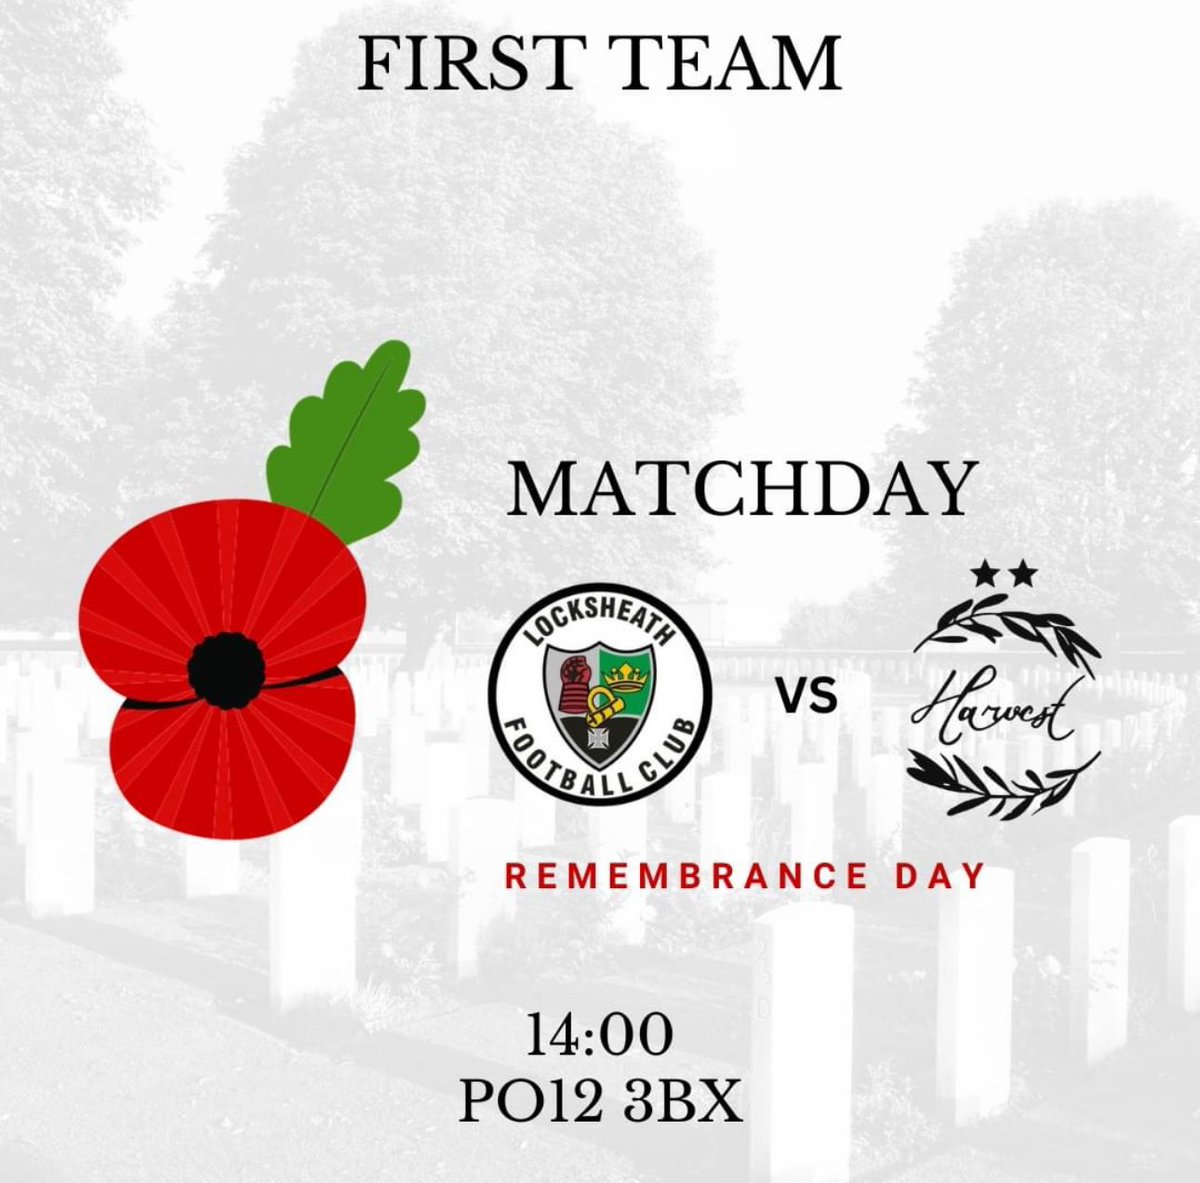 Tomorrow’s games on #RemembanceDay both our sides will proudly display the poppies like every year.